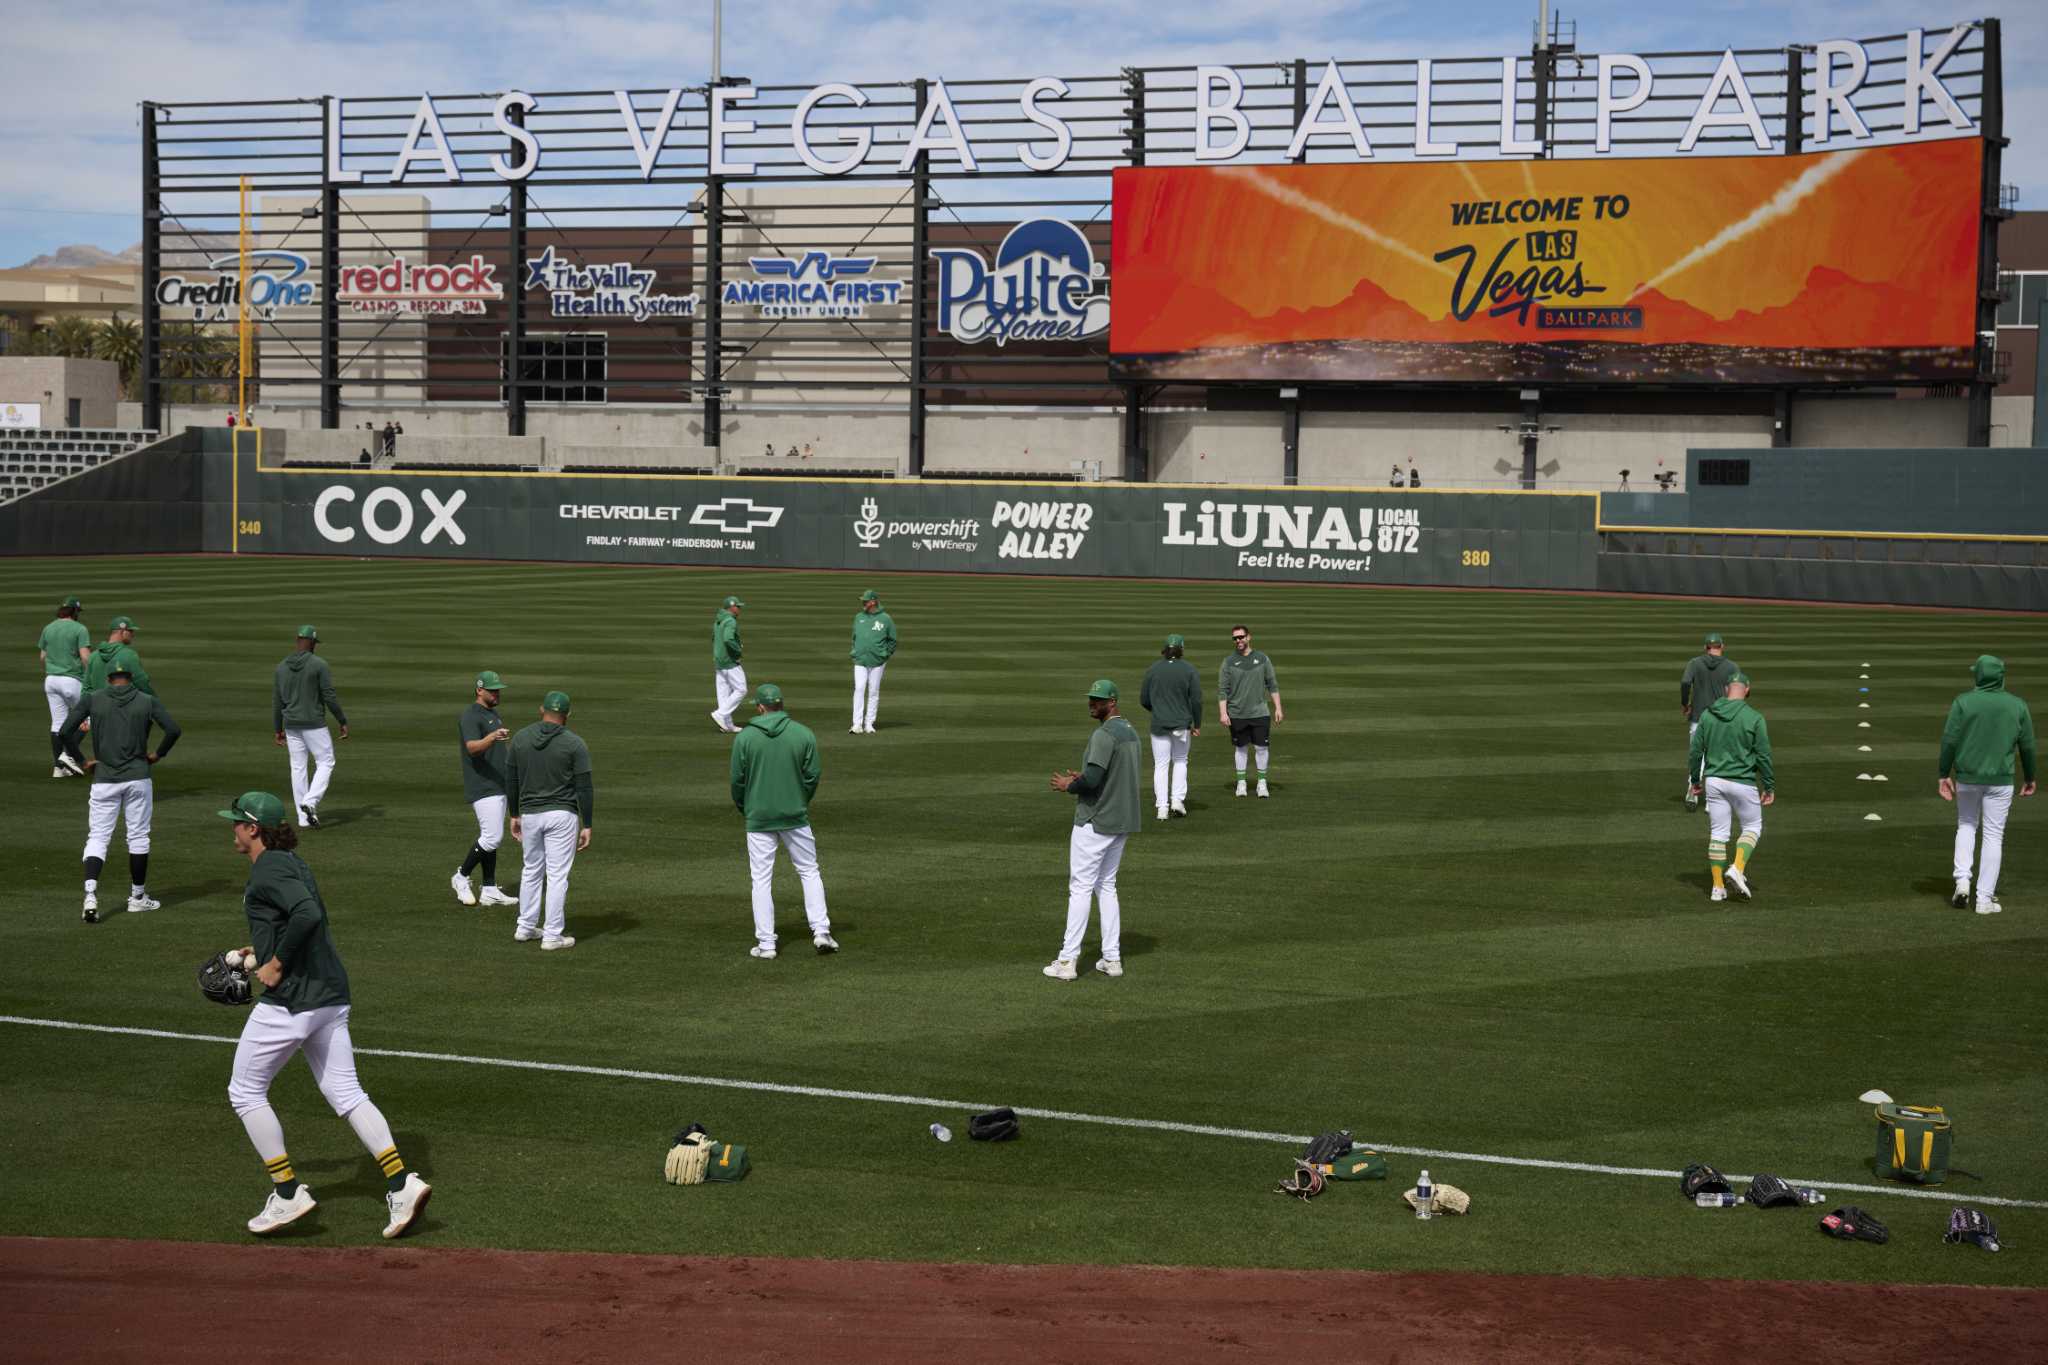 Oakland A's Fans Want Team to Sell Rather Than Move to Las Vegas - The New  York Times